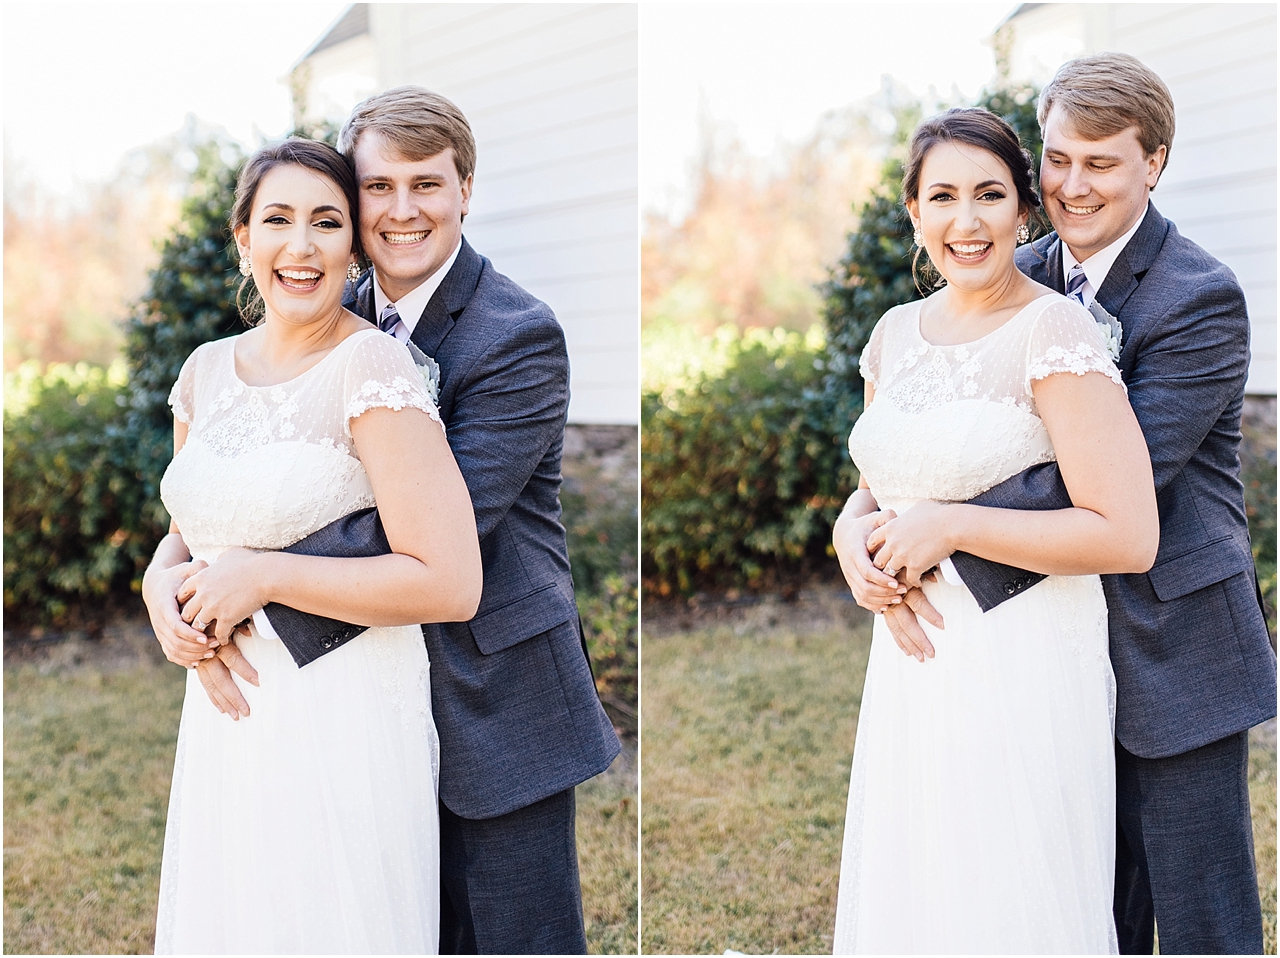  lindsey ann photography, wedding photographer, birmingham wedding photographer, alabama wedding photographer, church at branch cove 